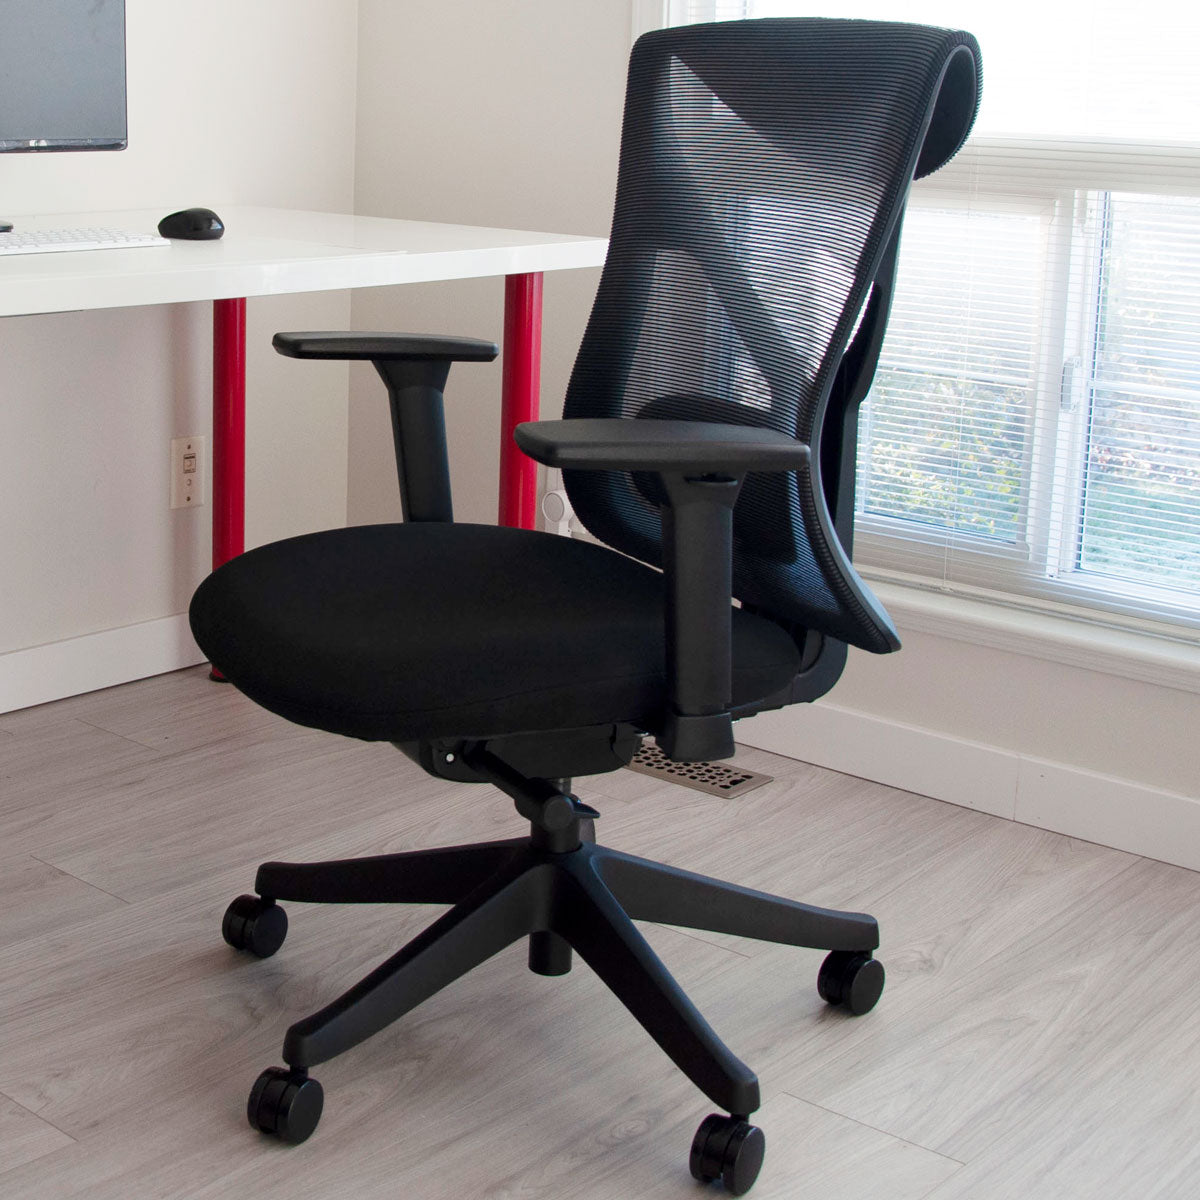 Why Mesh Chairs are a Must-Have for Summer Home Offices